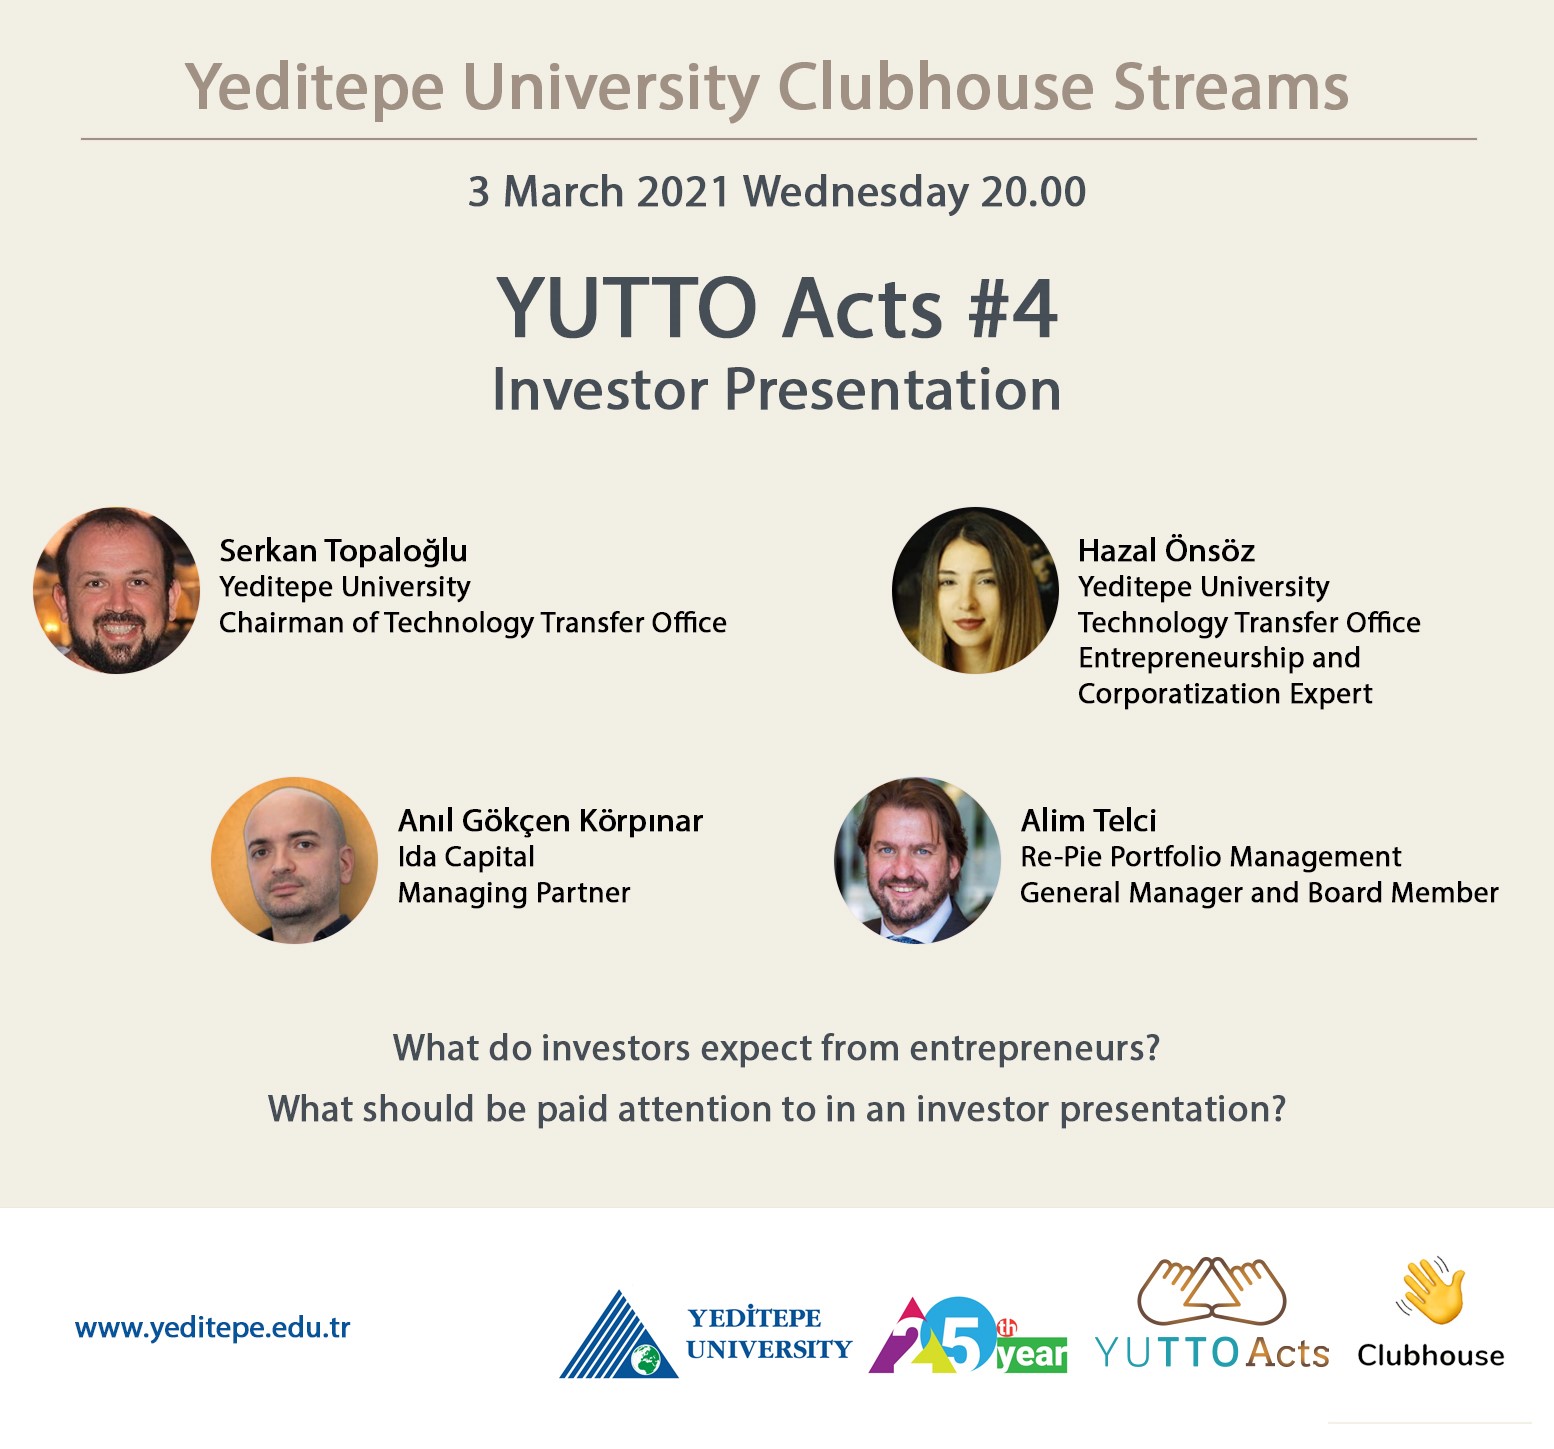 Yeditepe University Clubhouse Streams | YUTTO Acts #4